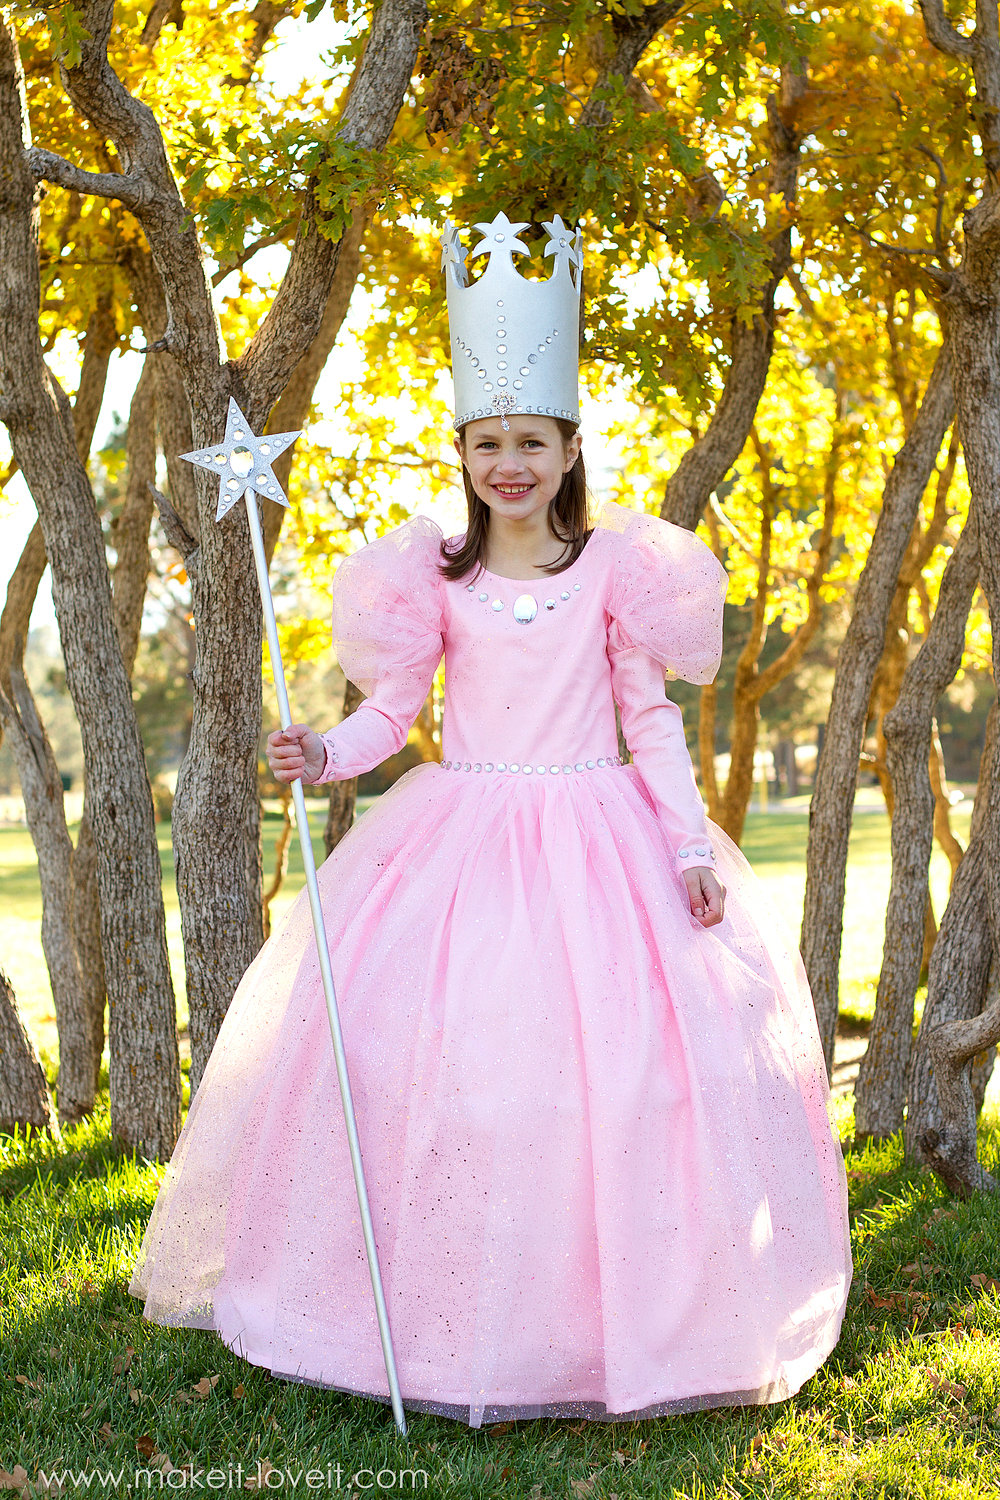 crystal delp recommends Pics Of Glinda The Good Witch